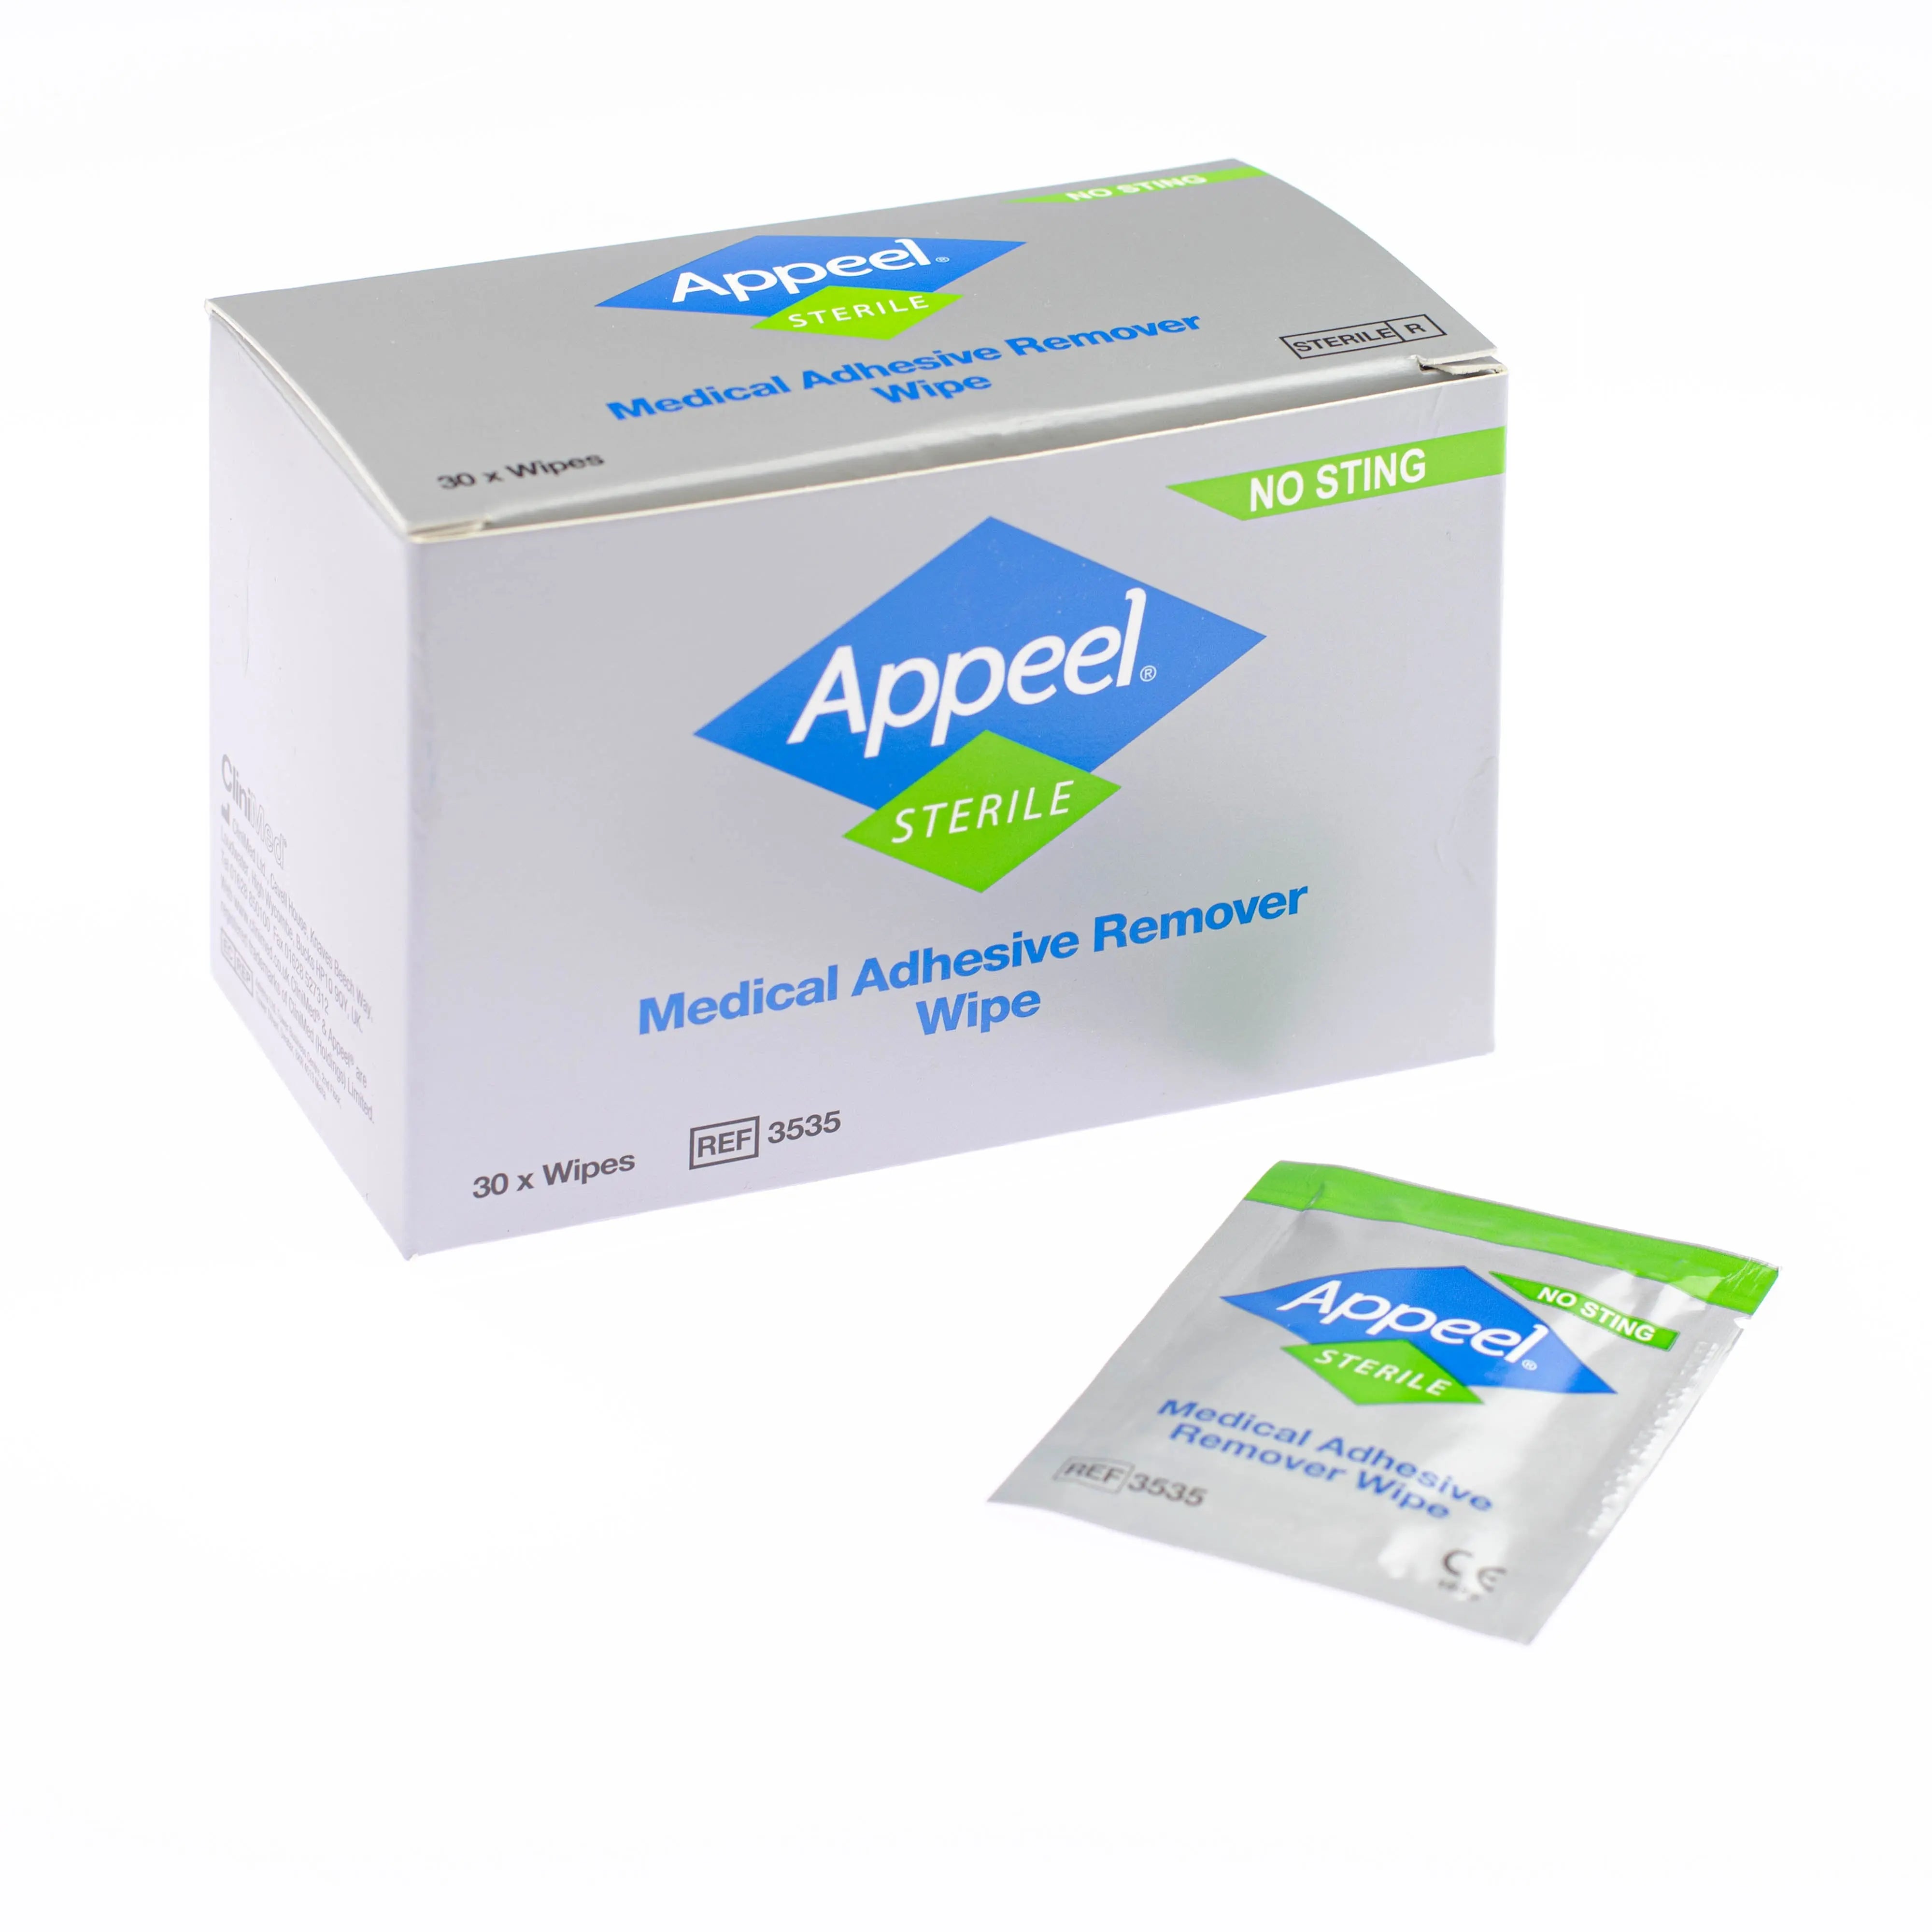 Appeel Sterile Medical Adhesive Remover Wipes (x30)